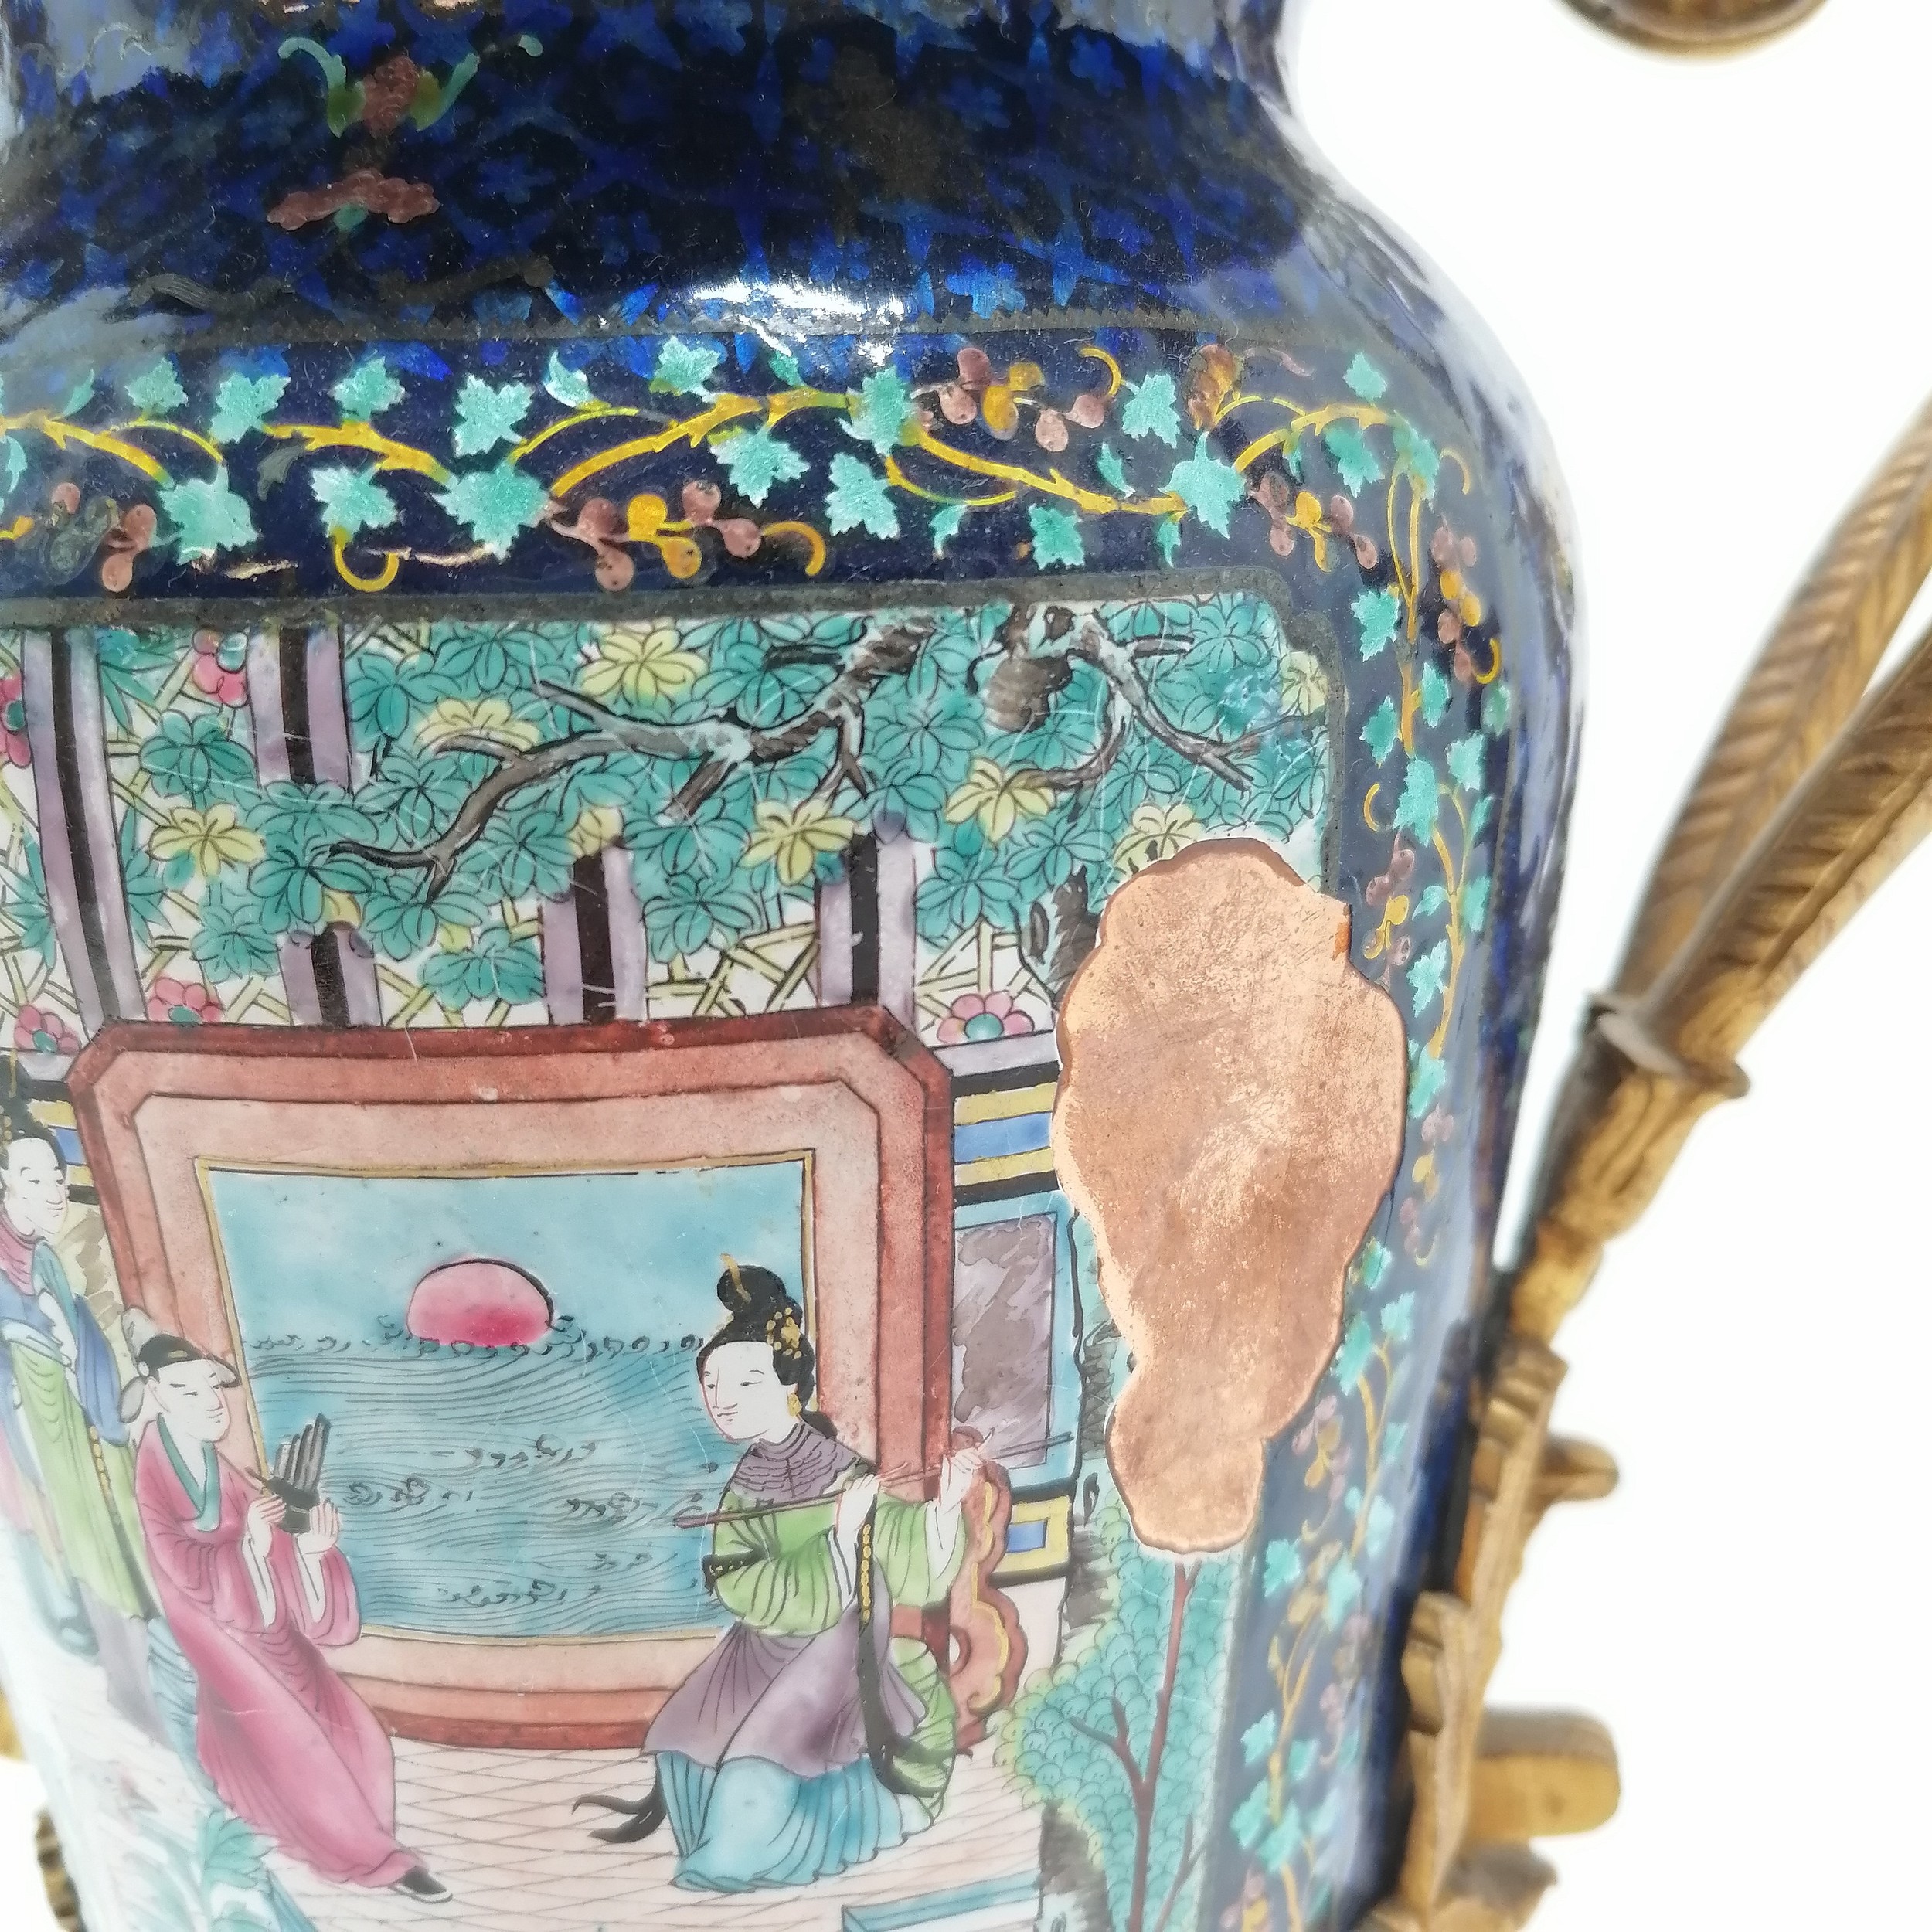 Antique Chinese Cantonese enamelled vase with French ormolu mounts - 35cm high missing it's lid - Image 3 of 8